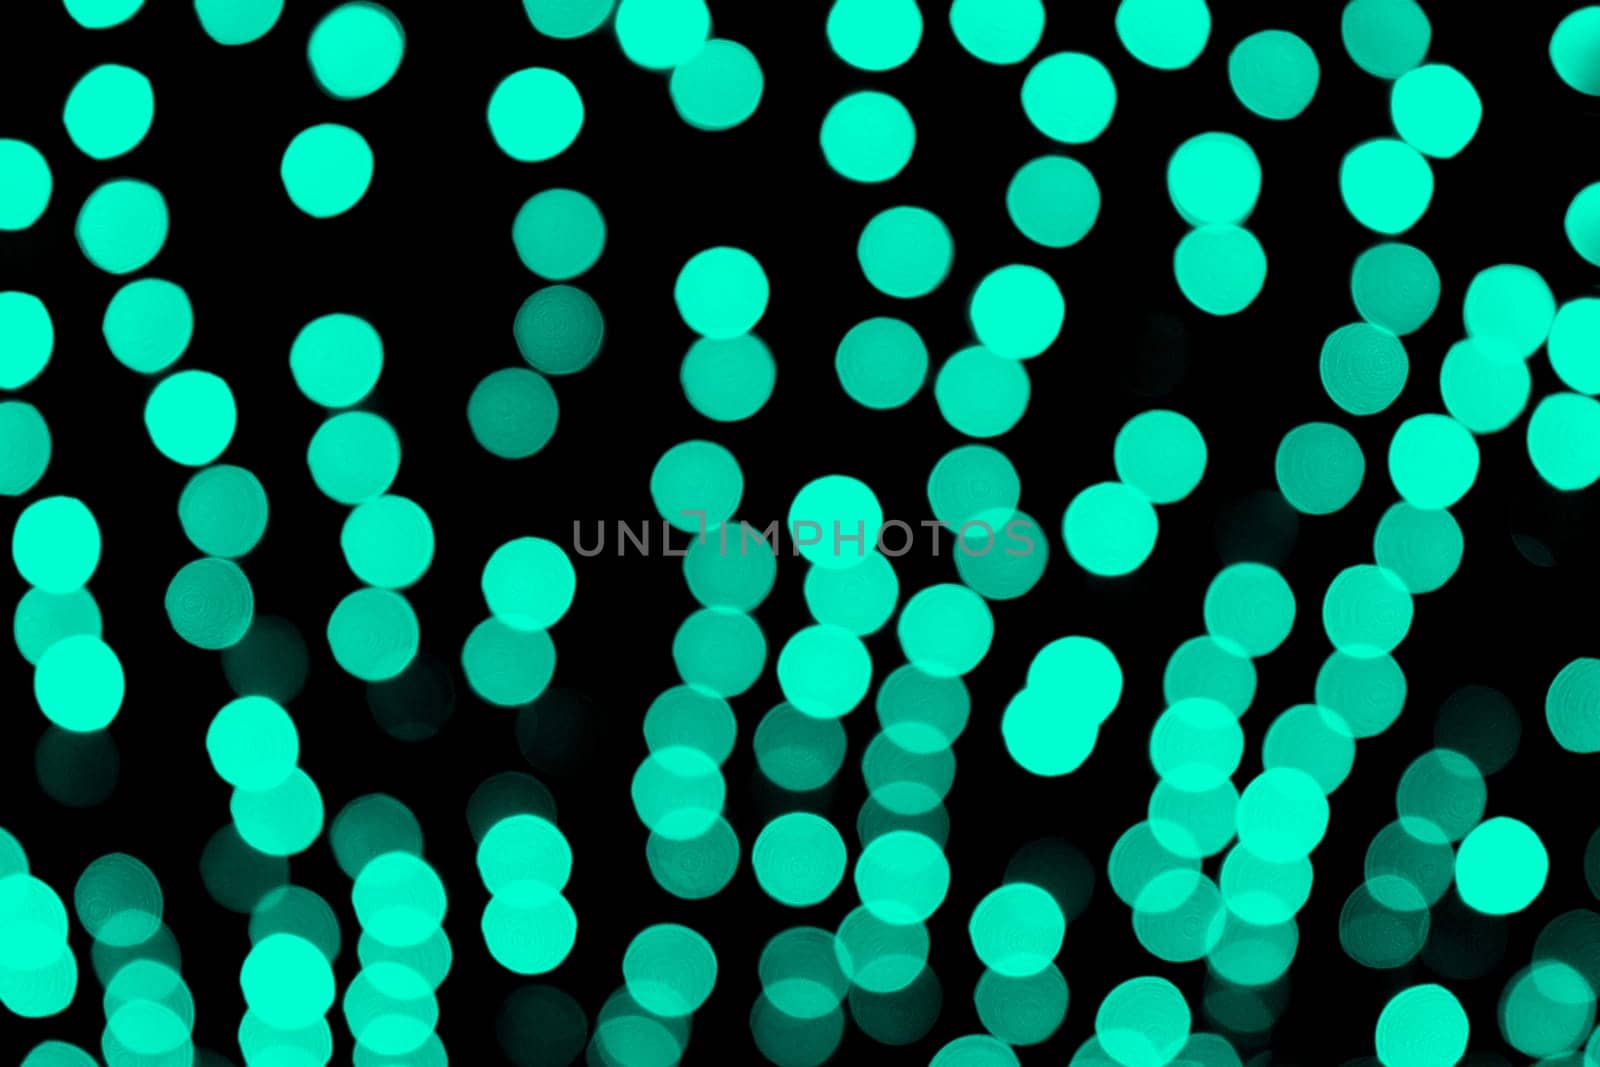 Unfocused abstract colourful bokeh black background. defocused and blurred many round blue light by Snegok1967